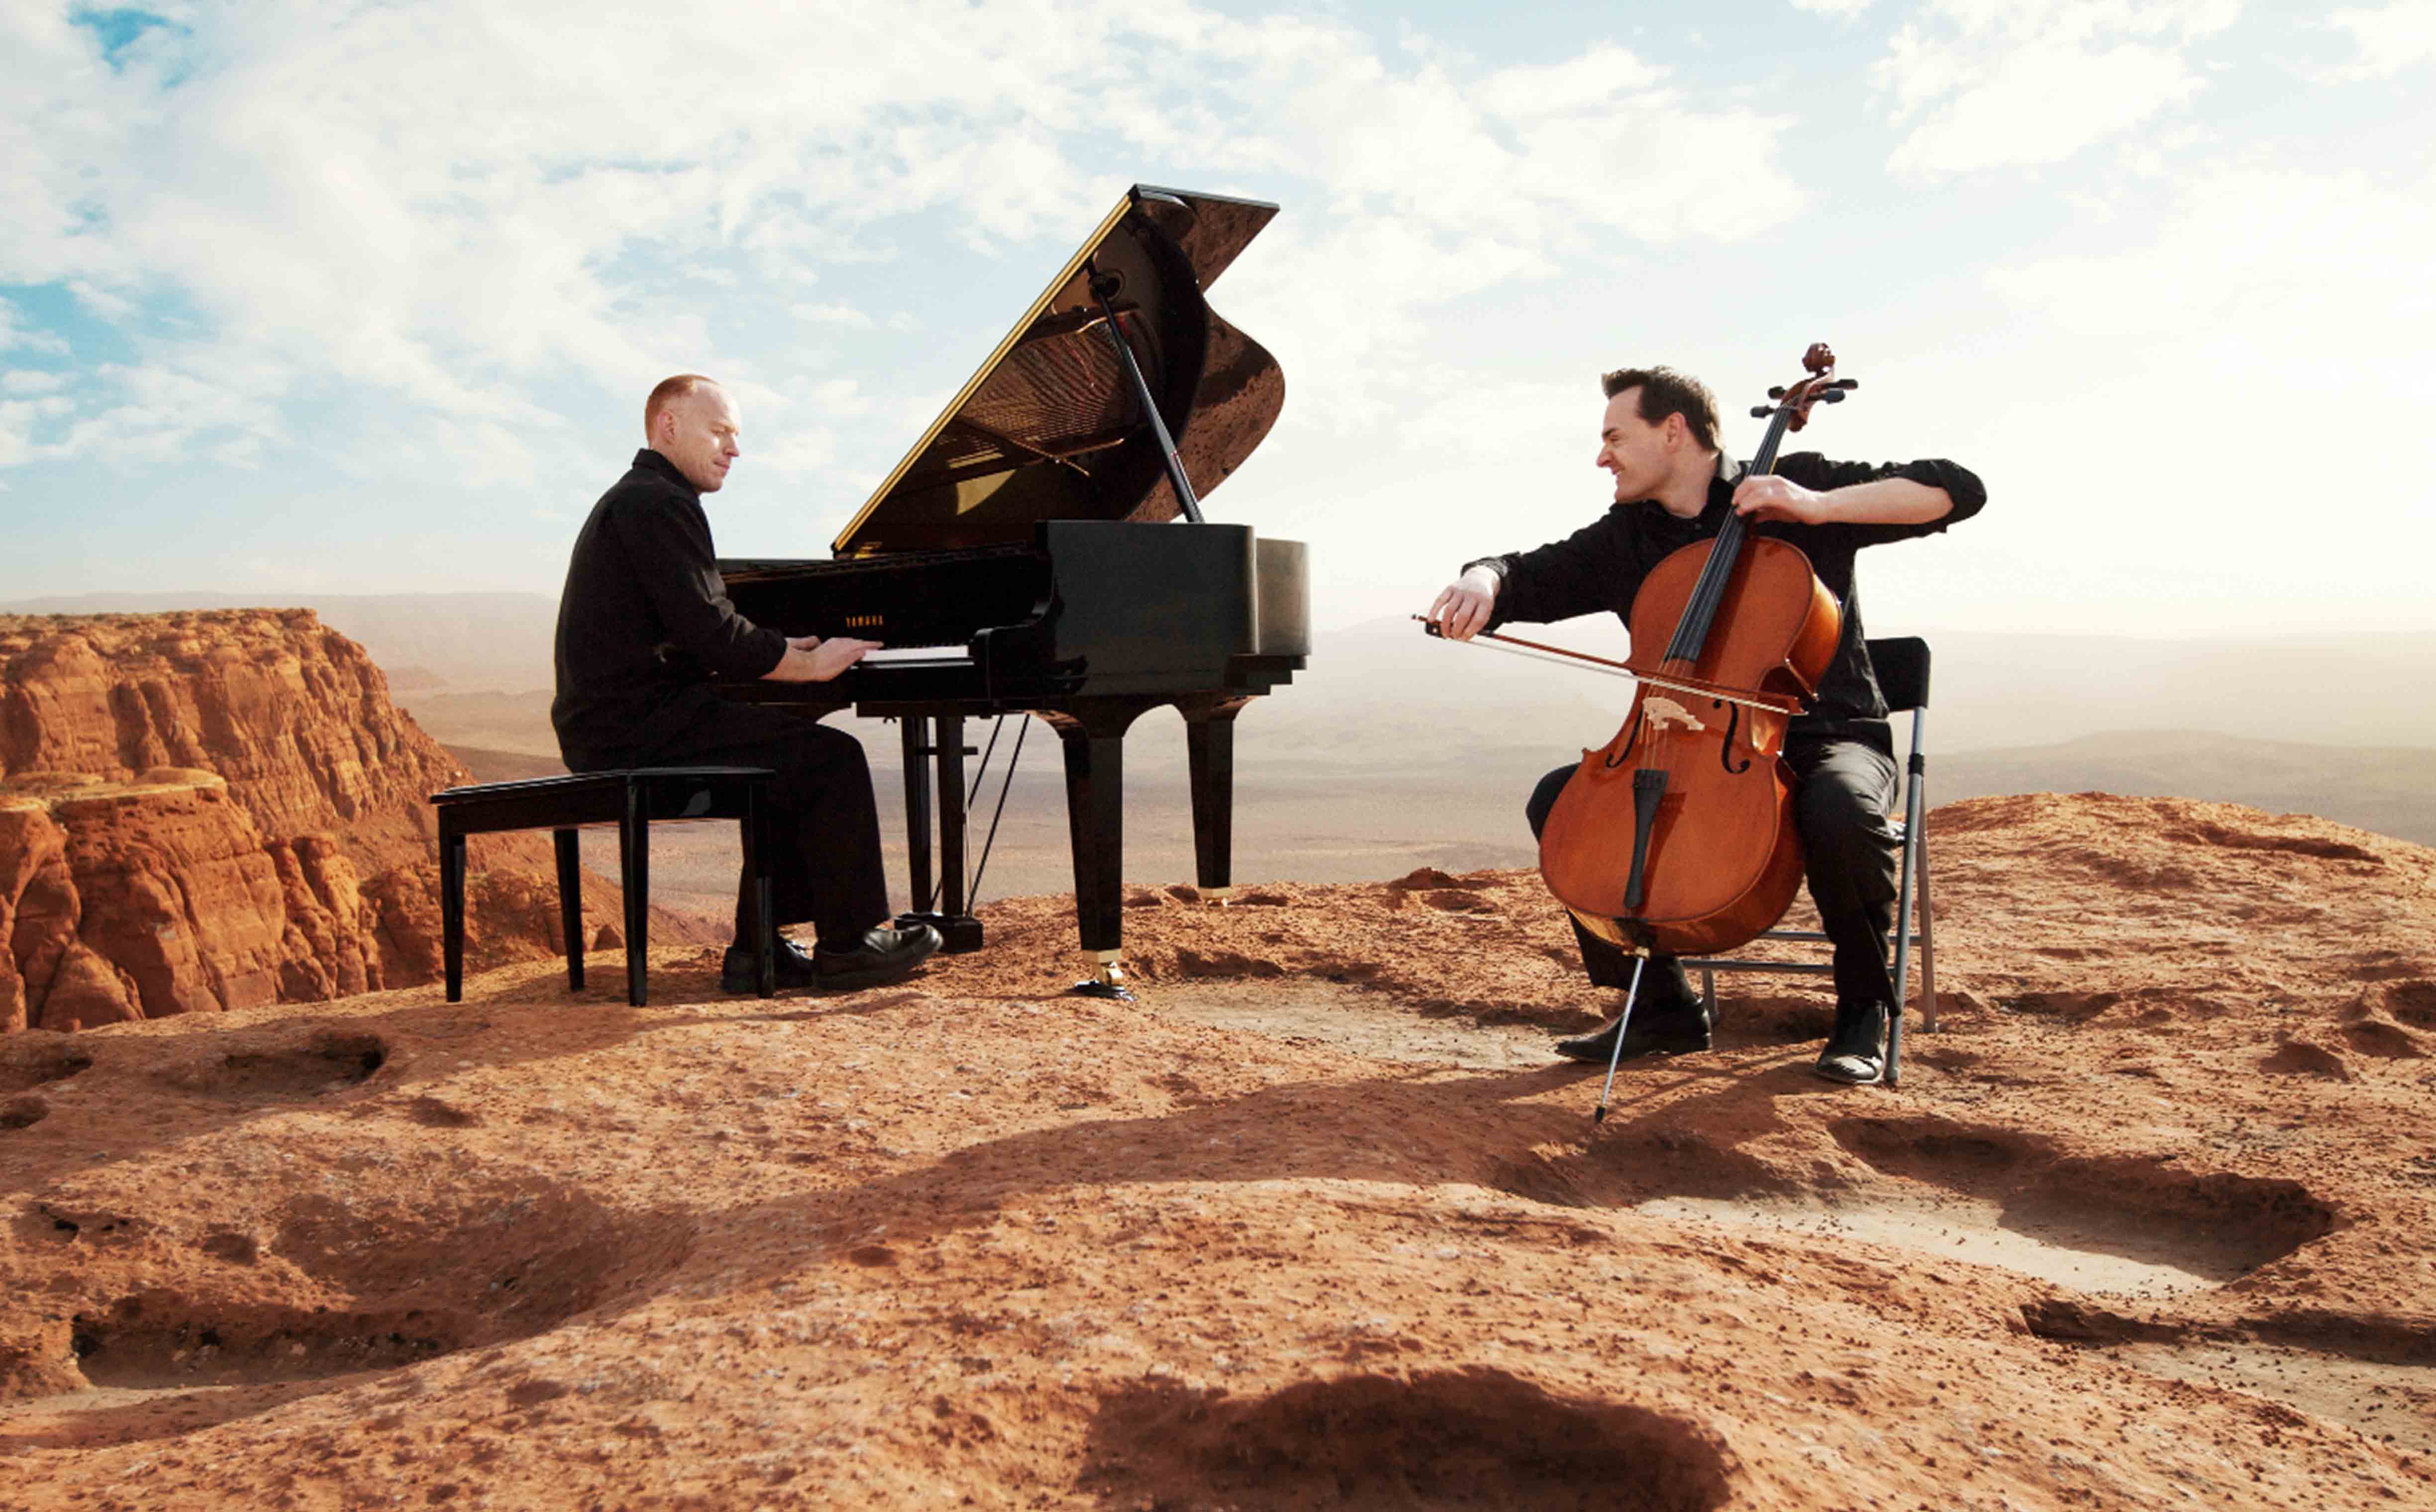 the piano guys let it go